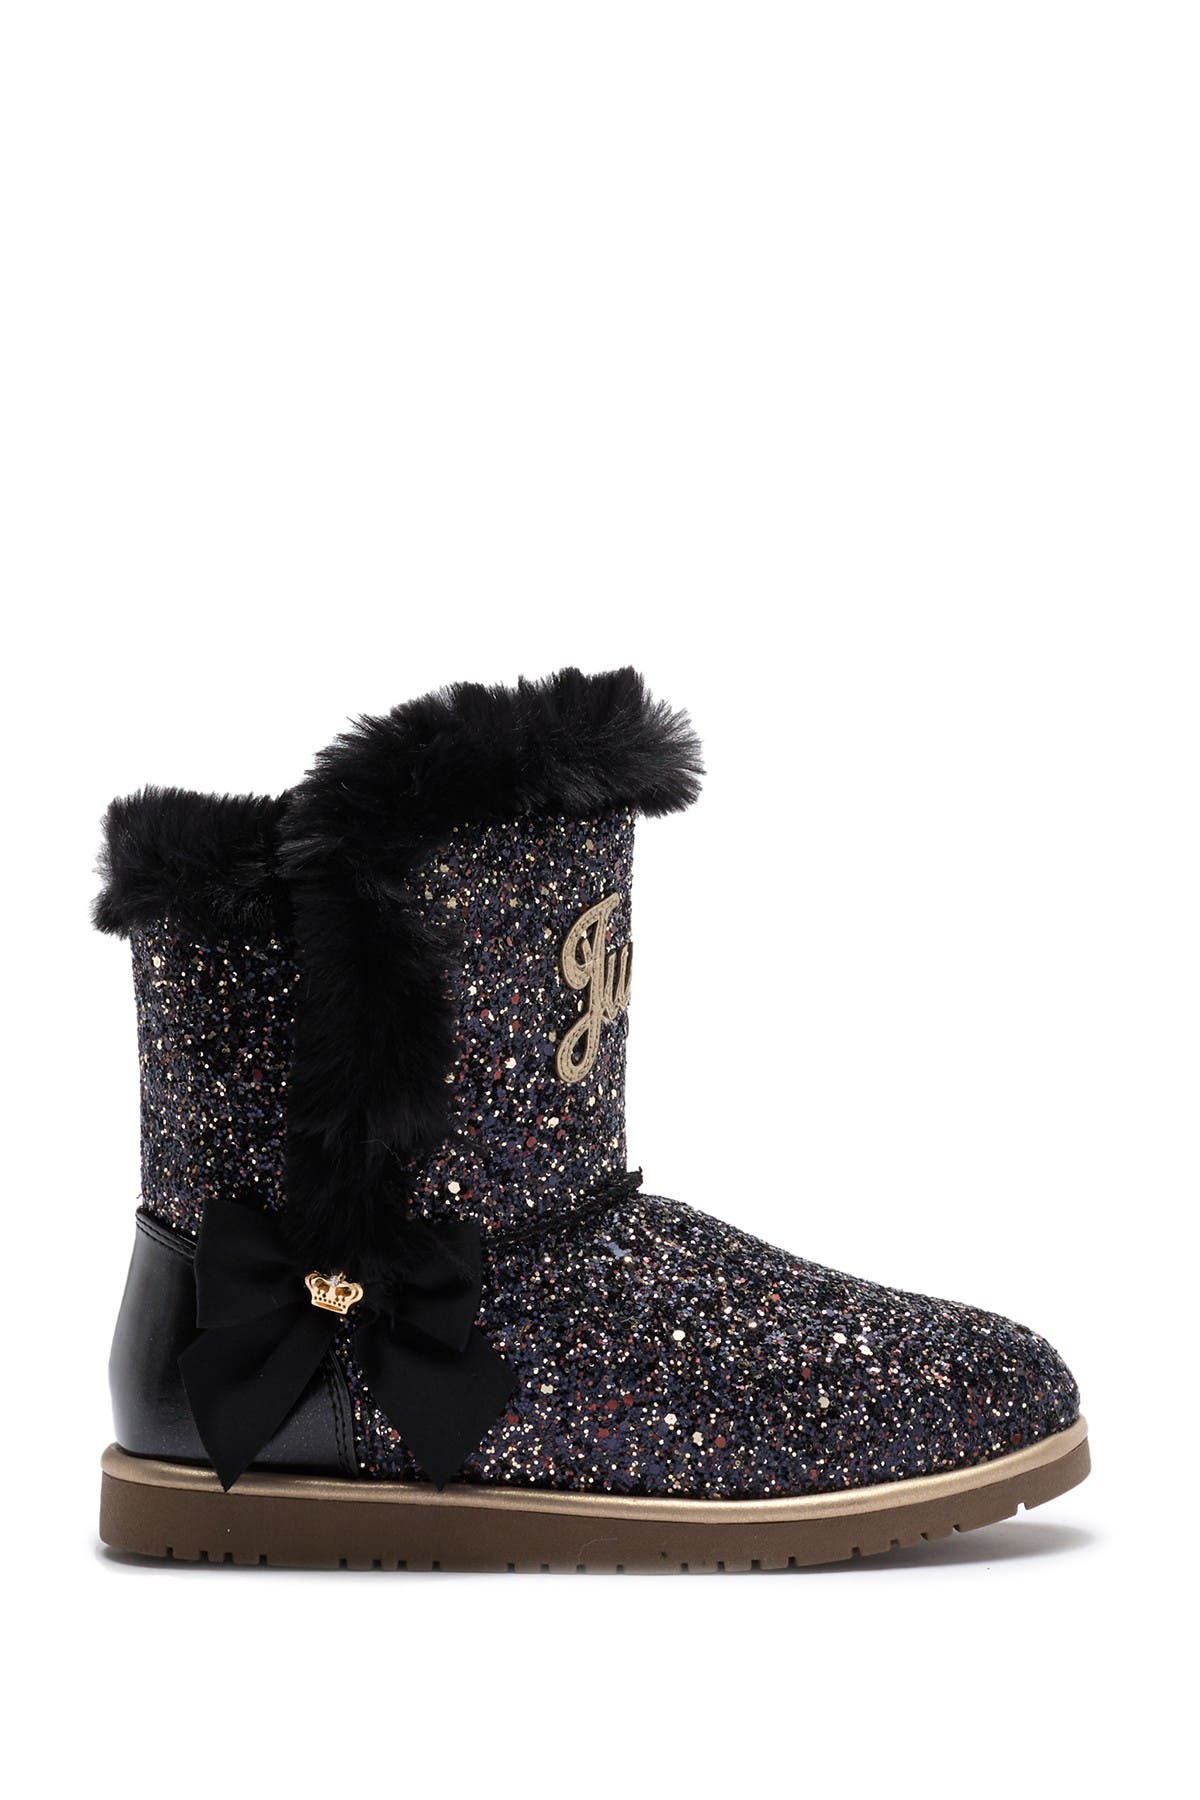 juicy couture lil windsor boots